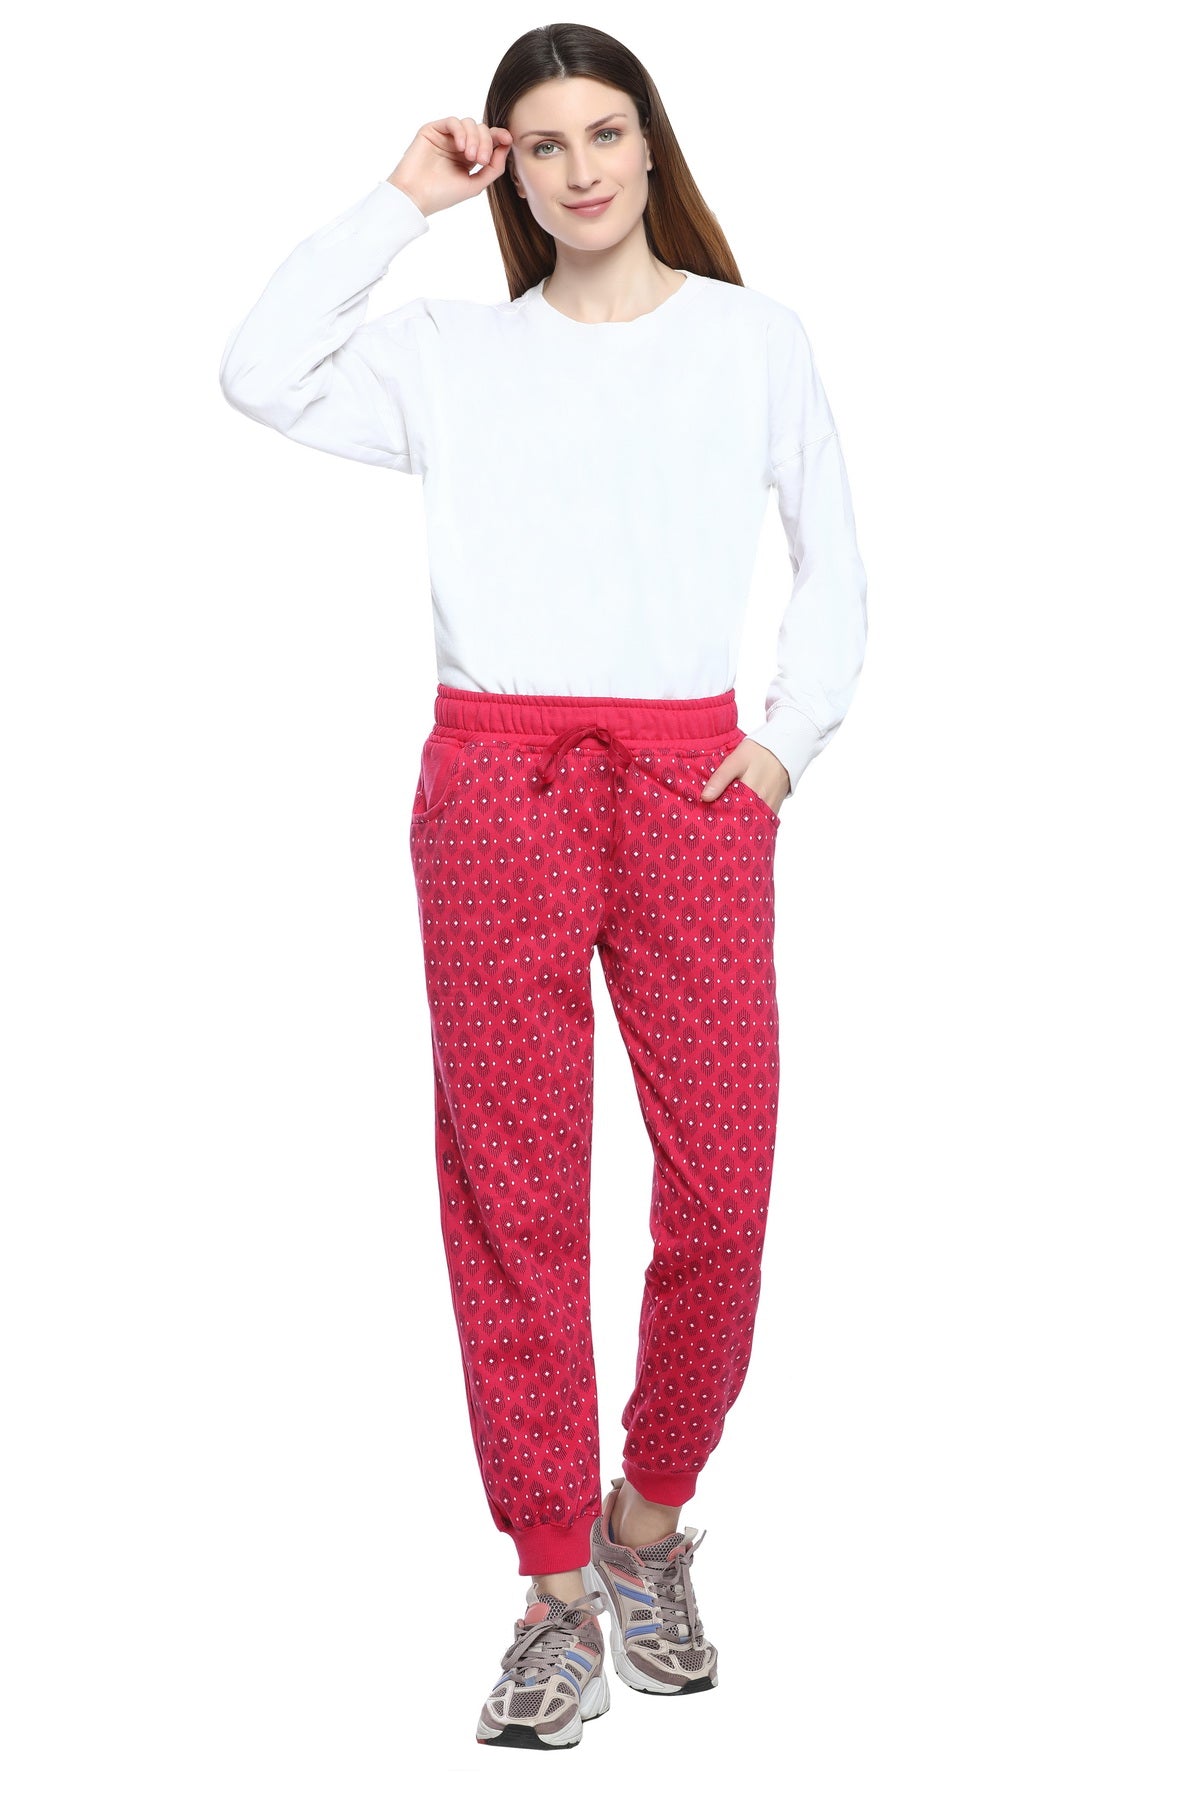 Comfortable Pink Winter Fleece Cotton Printed Joggers for Women online in India